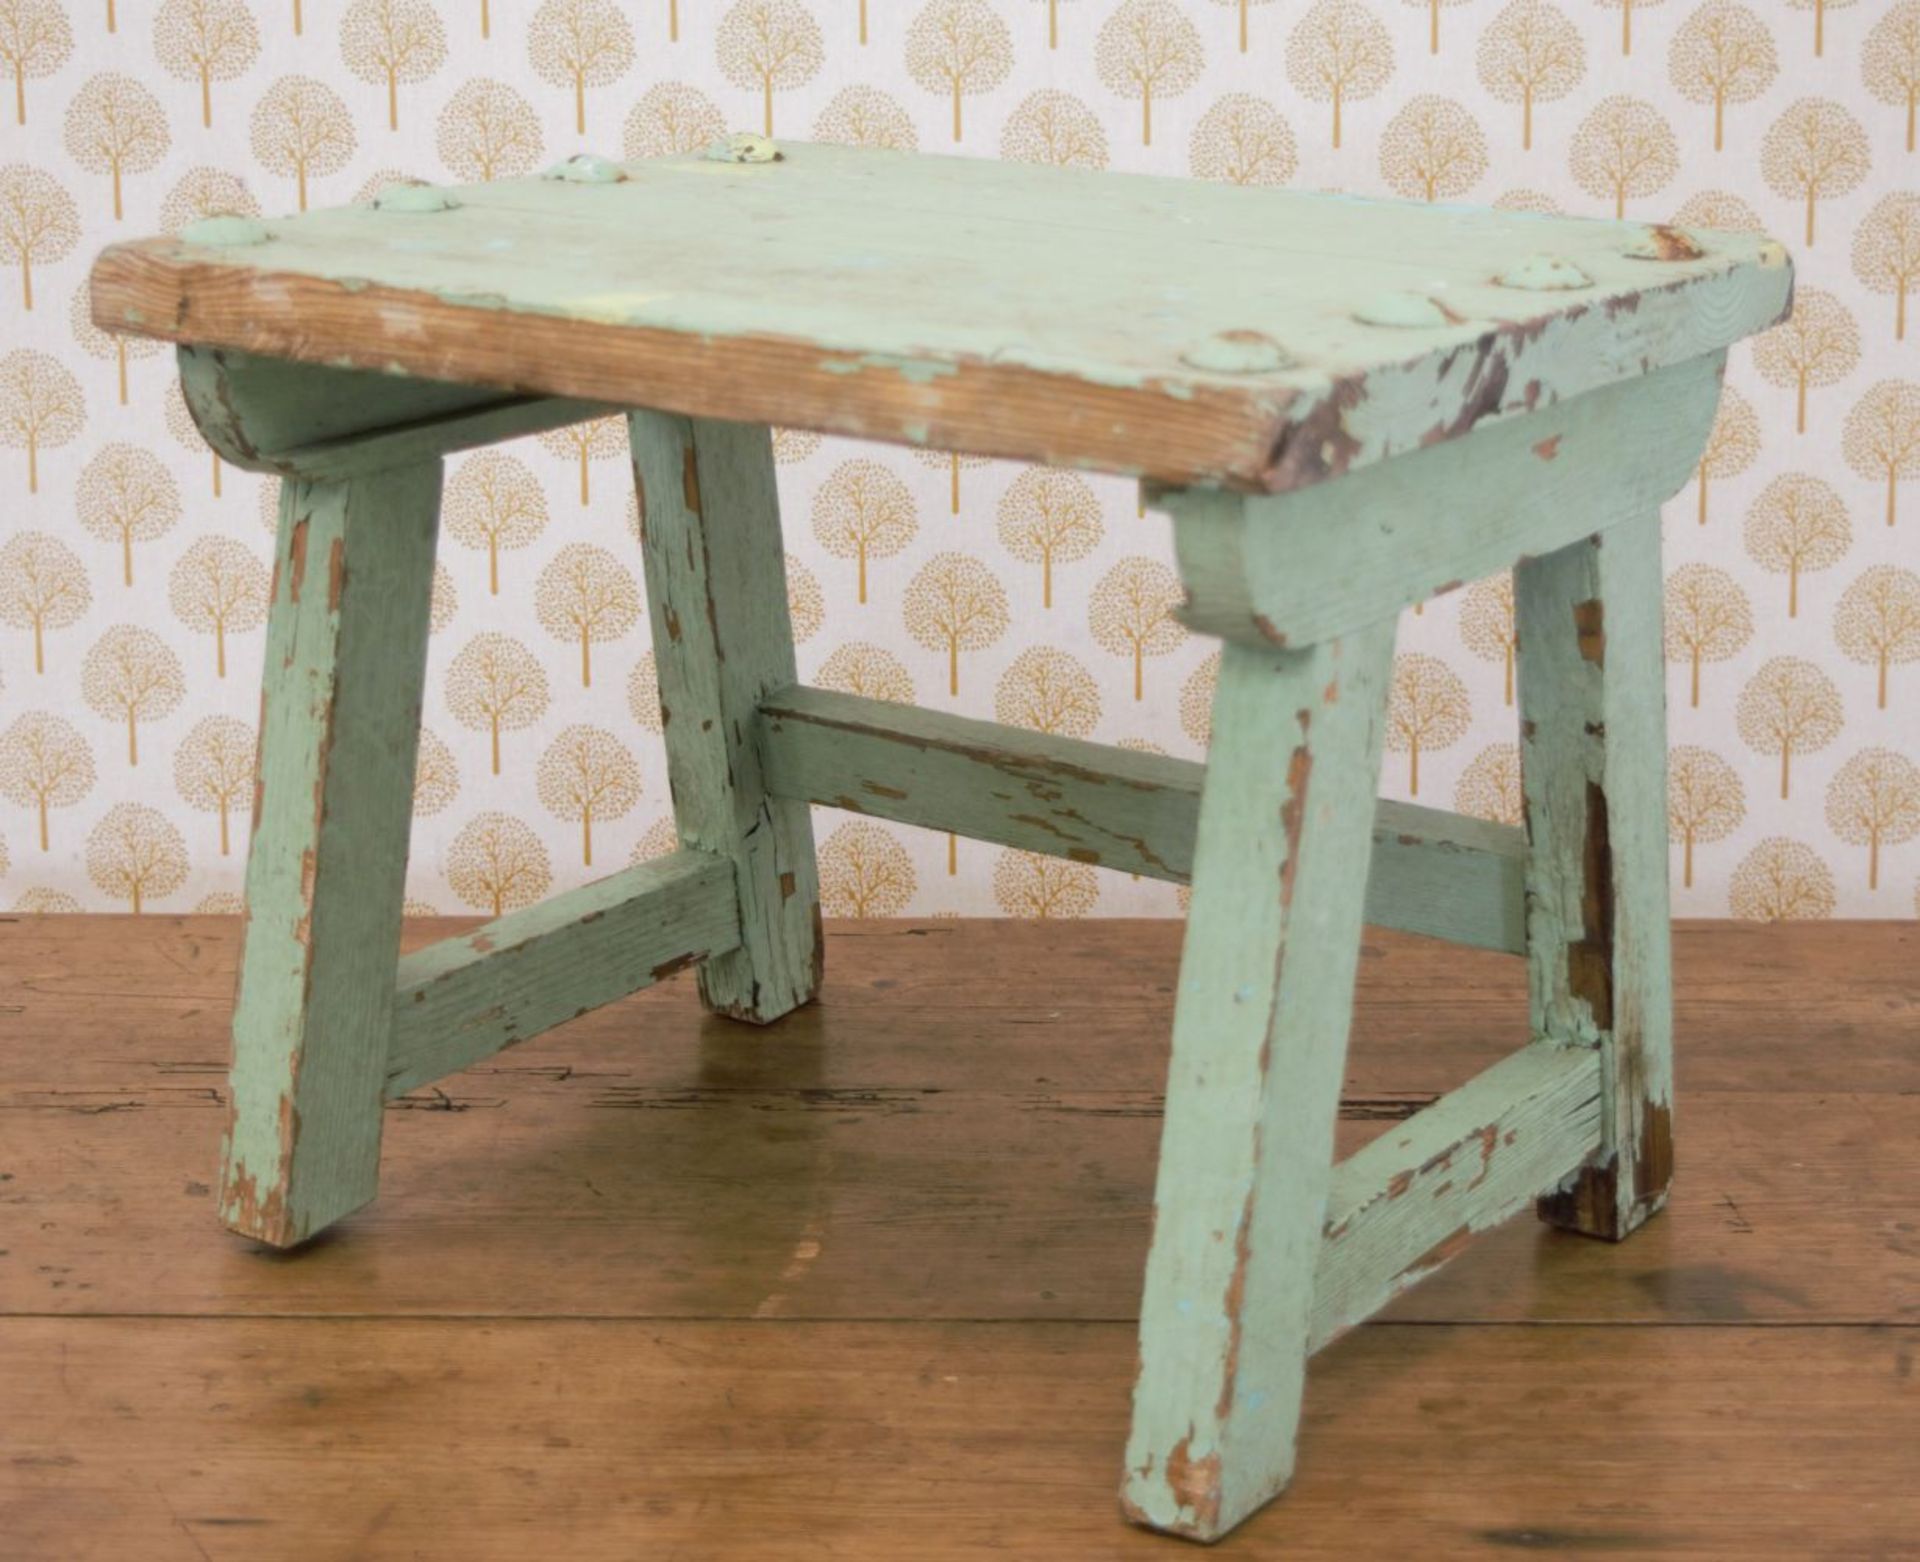 19TH-CENTURY PAINTED PINE KITCHEN STOOL - Image 2 of 2